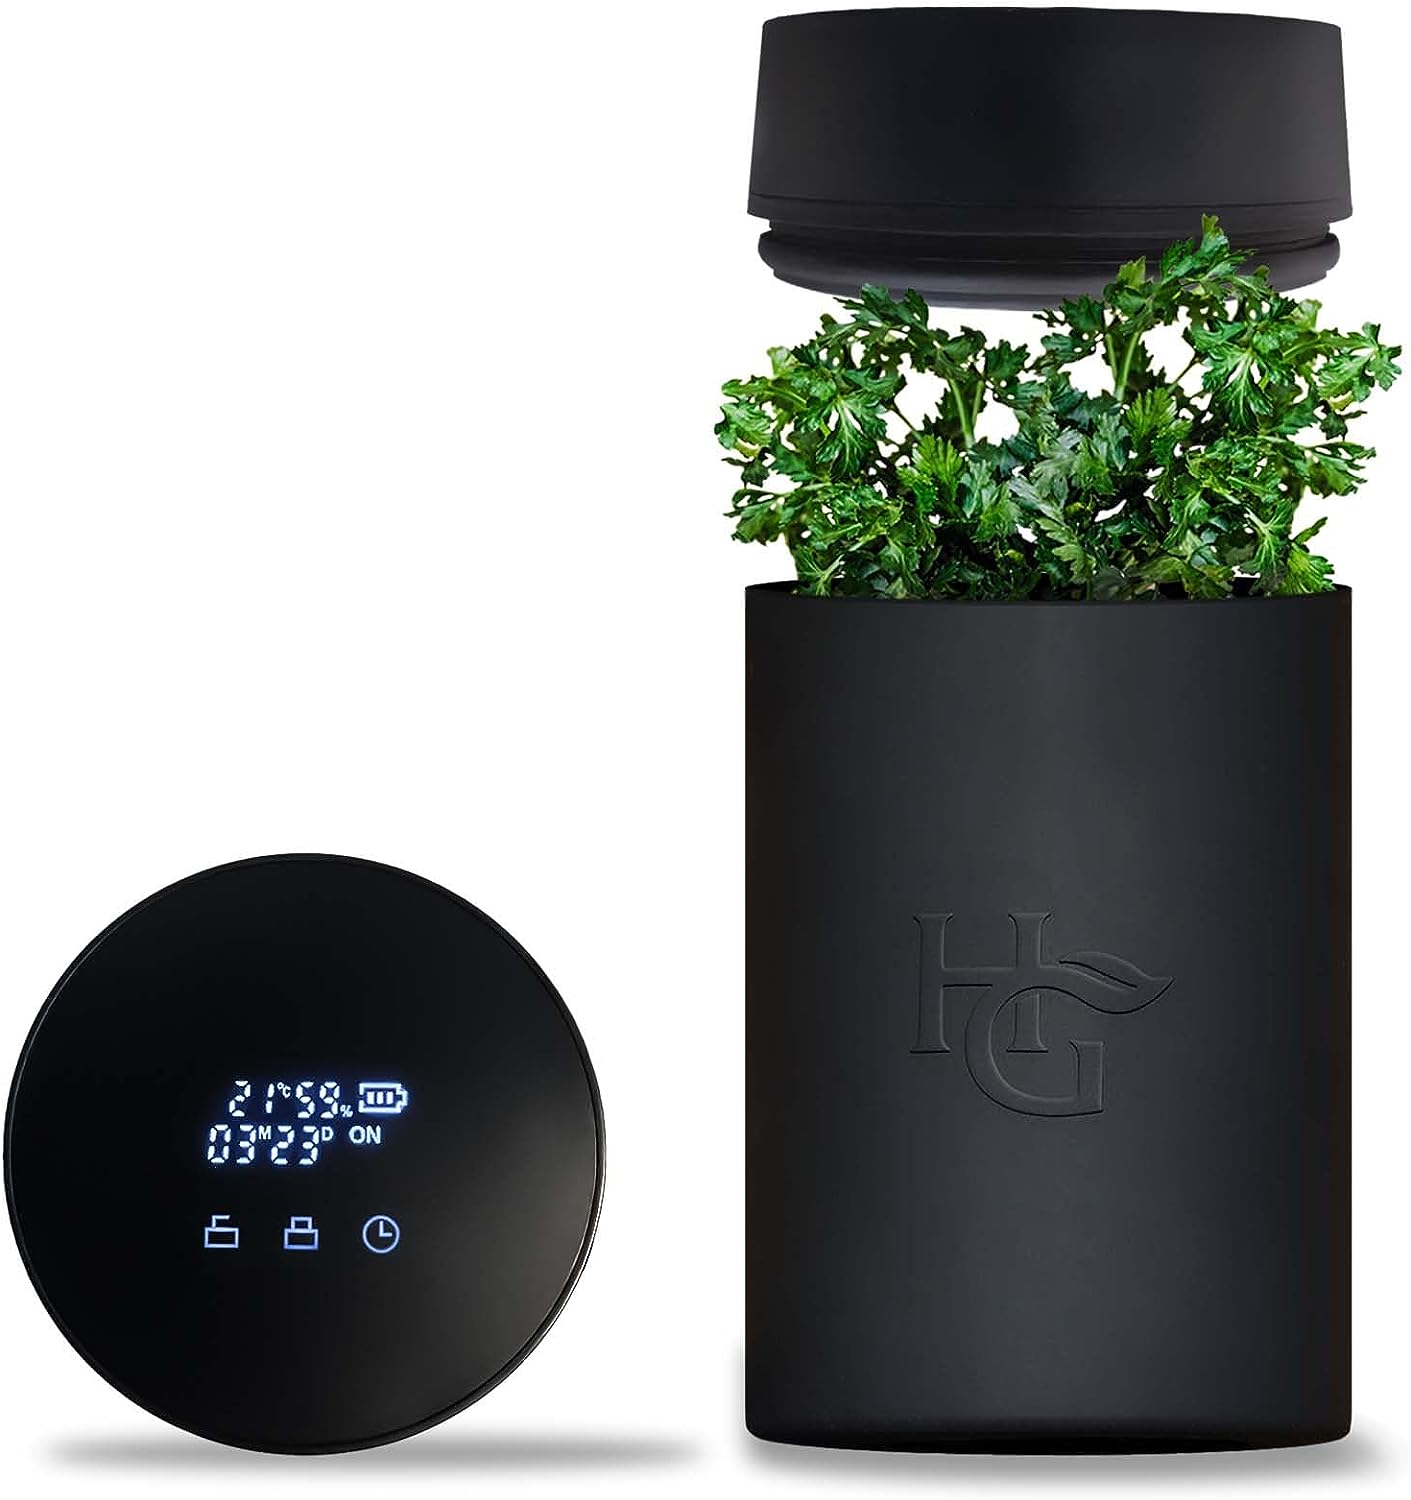 Sure Cure Classic Jar, Herb Storage Perfected, Humidity Moisture Control